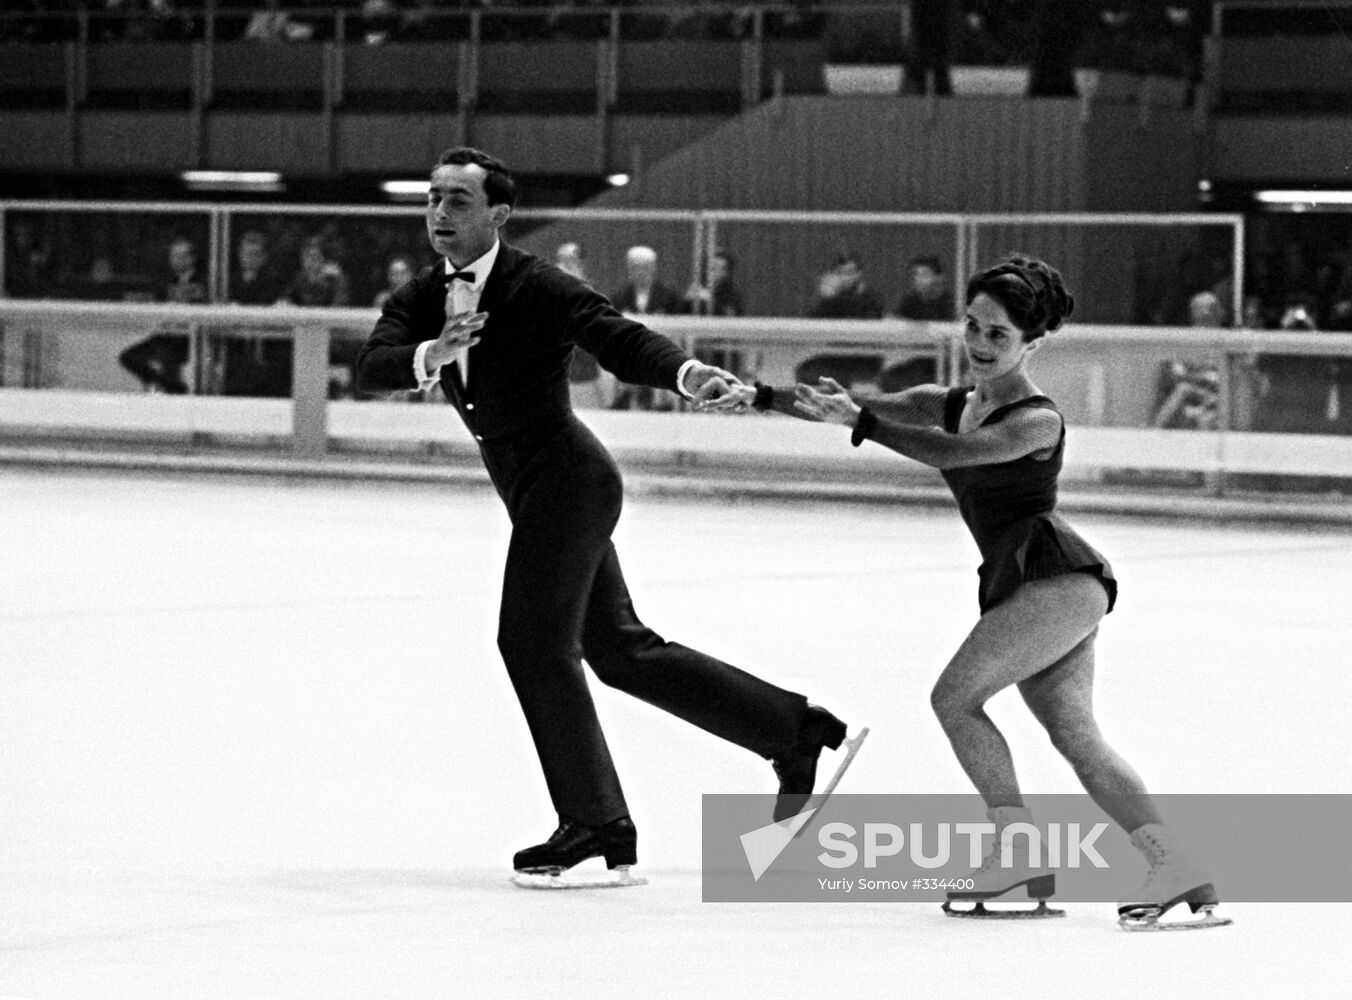 The 1968 Winter Olympics in Grenoble